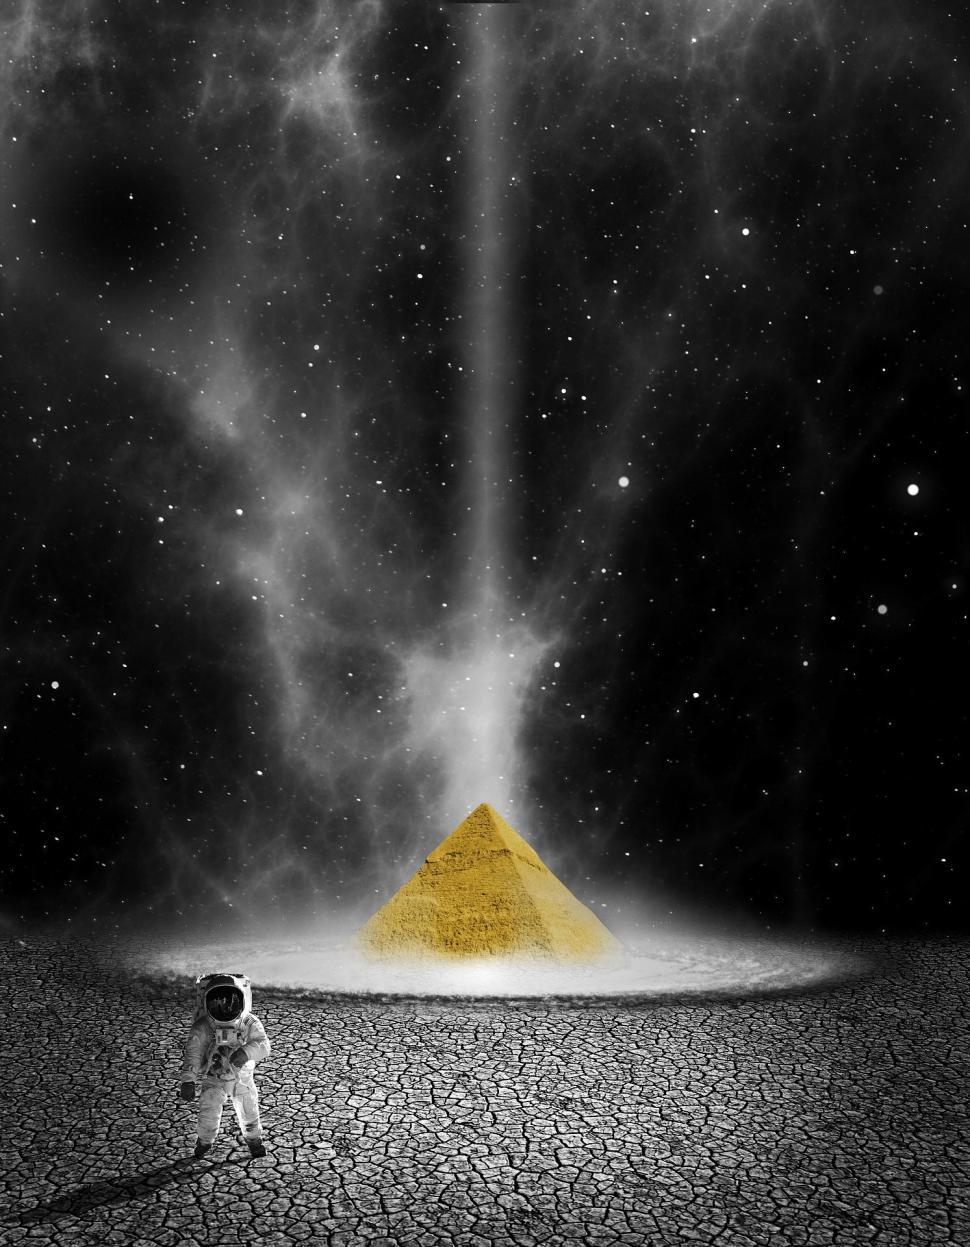 Free Image of Astronaut Standing in Front of Yellow Pyramid 